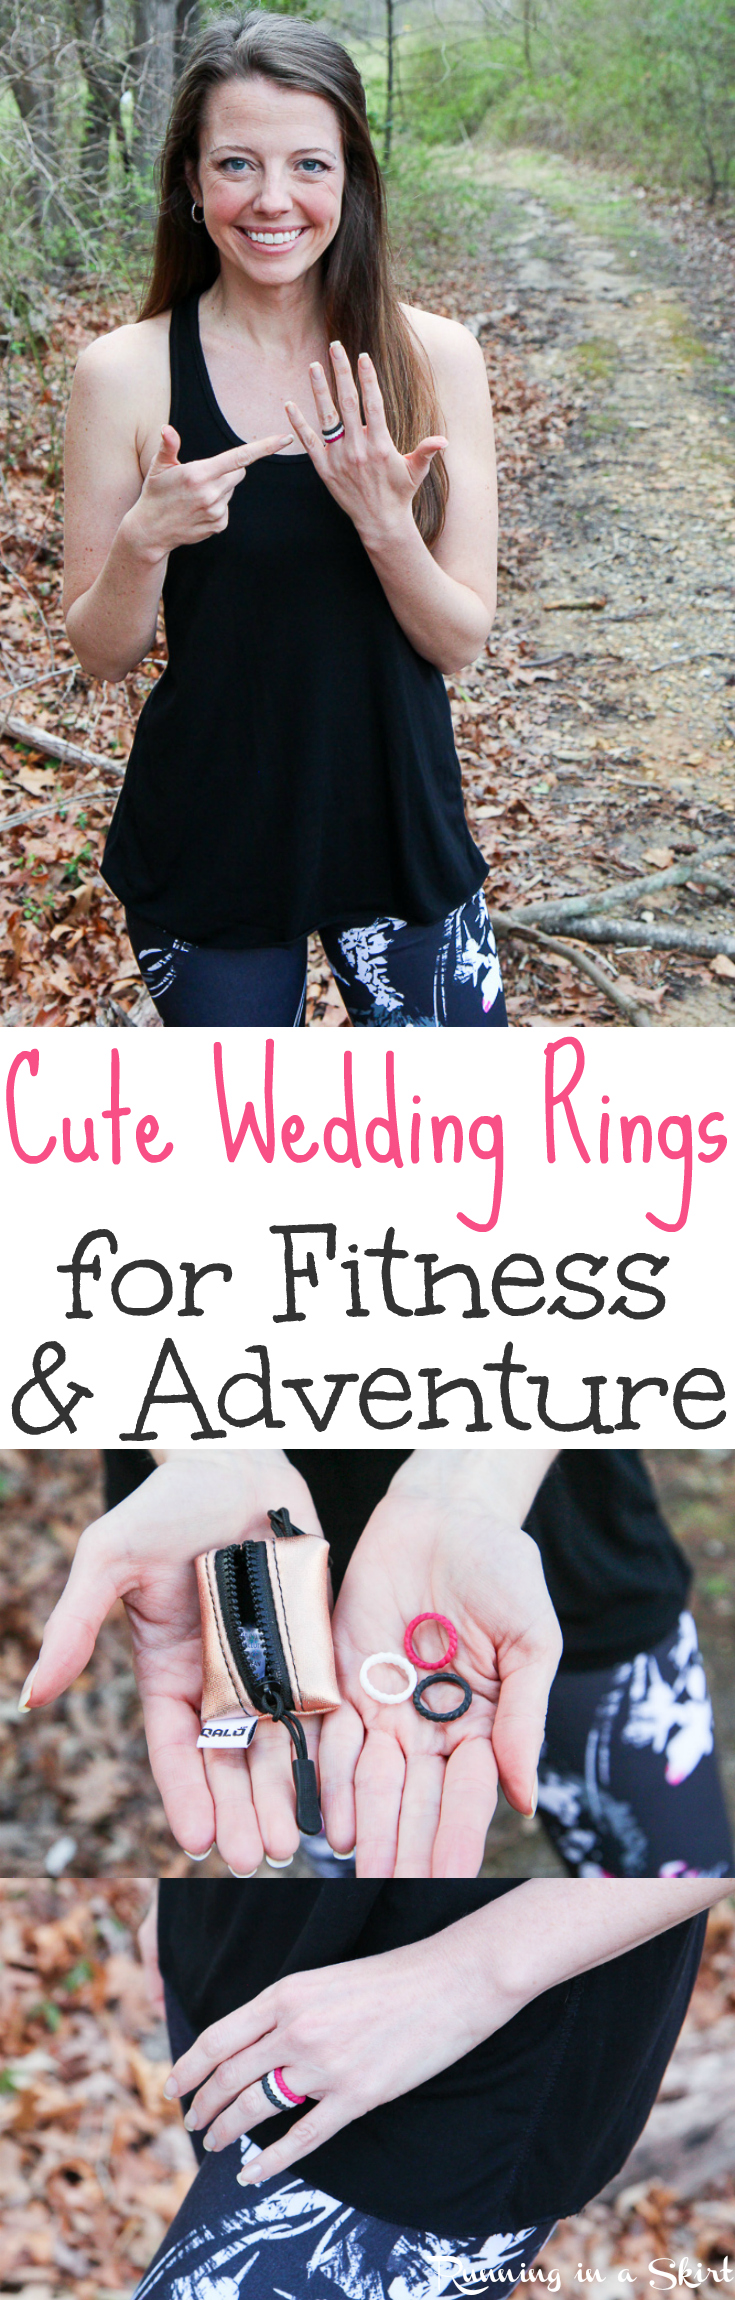 Cute Wedding Rings for Fitness & Adventure / Running in a Skirt